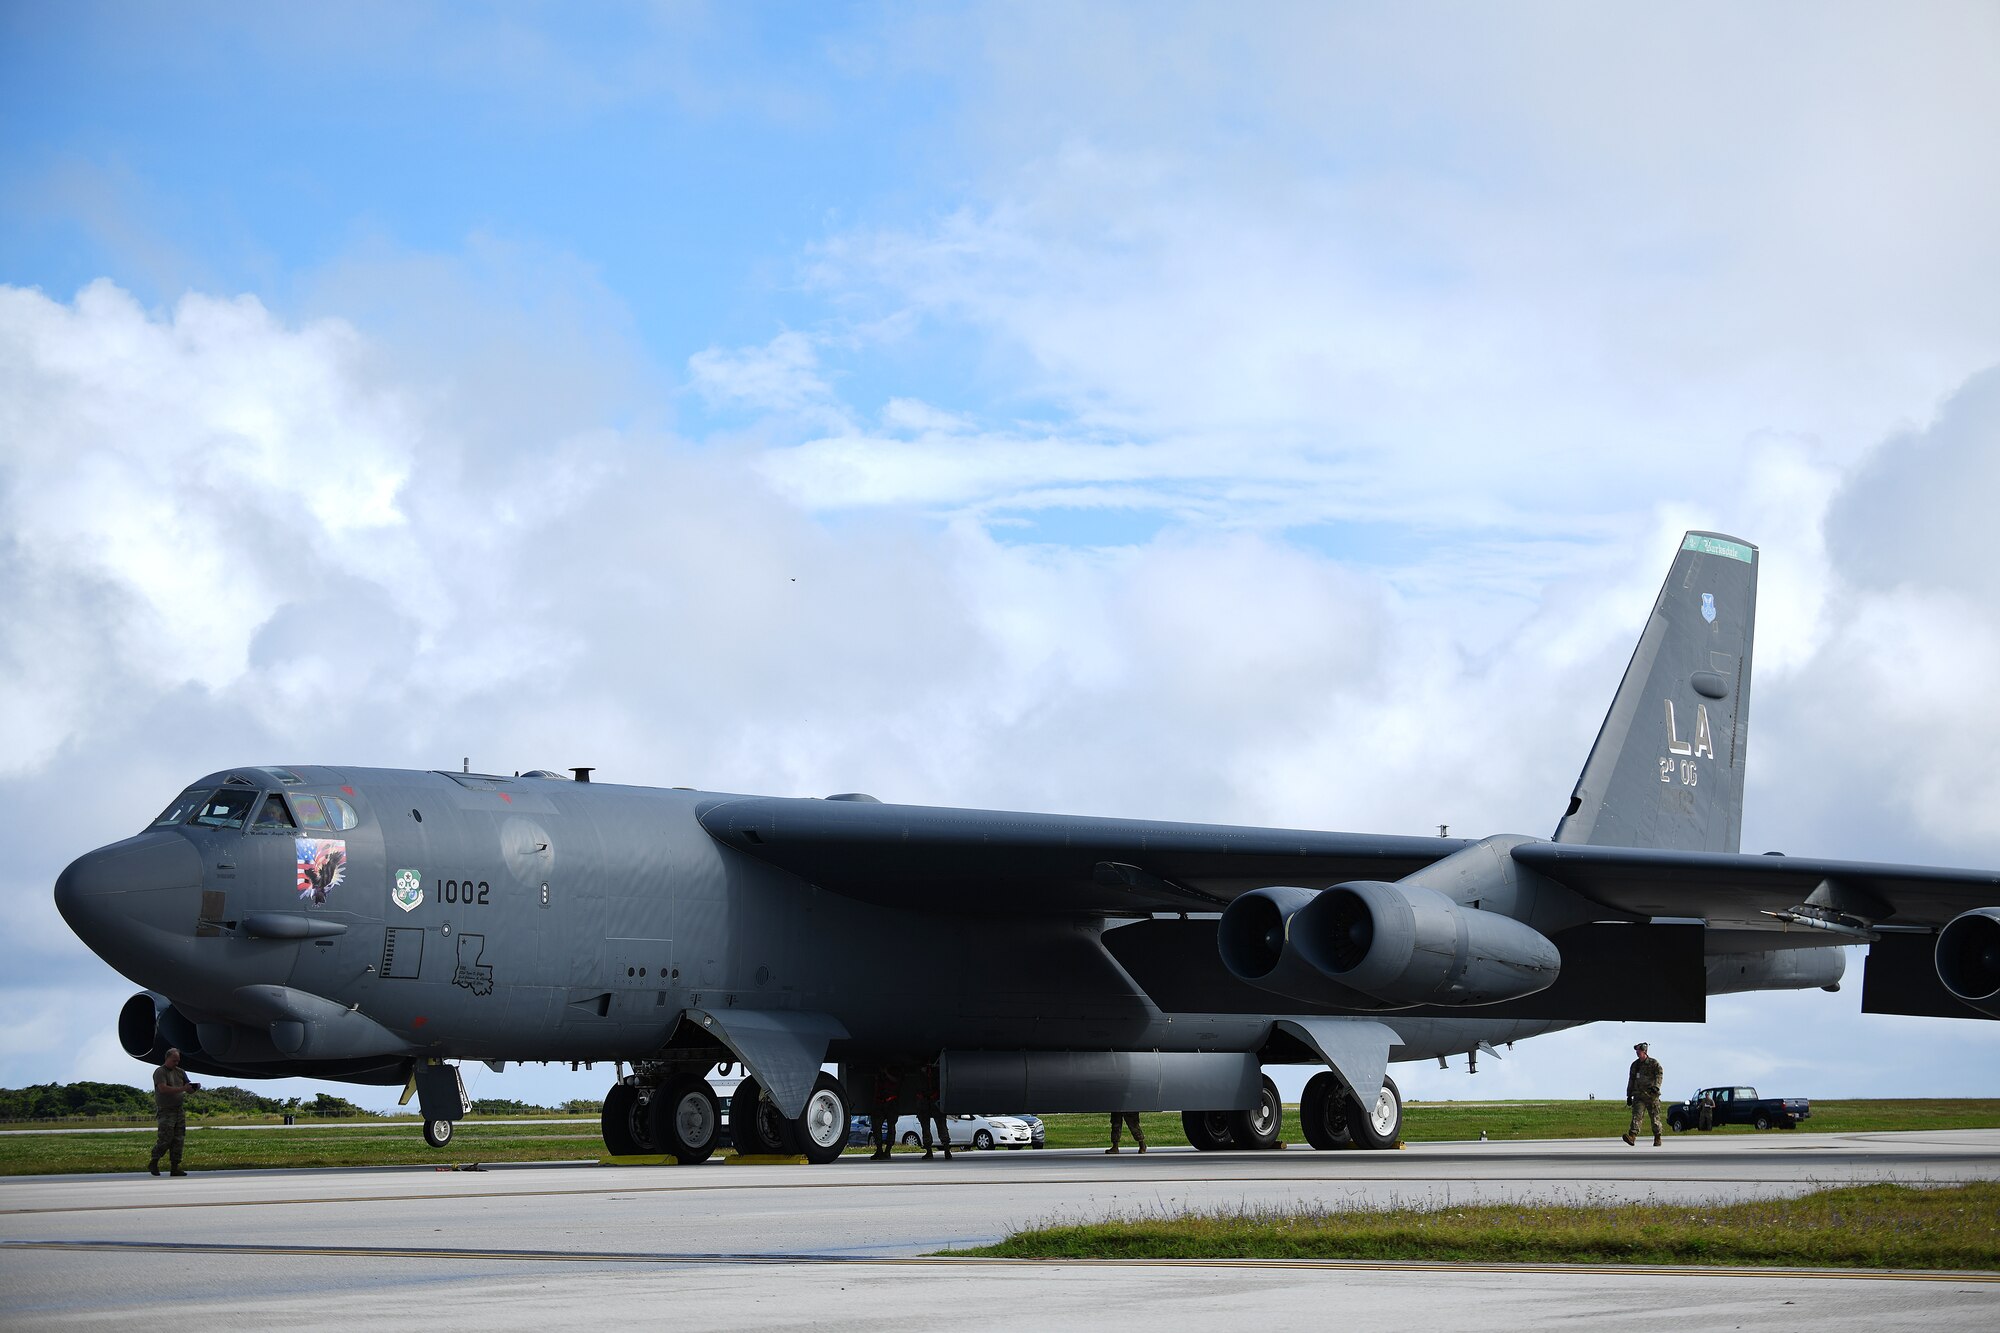 A B-52 Stratofortress assigned to Barksdale Air Force Base, La., arrives at Andersen Air Force Base, Guam, in support of a Bomber Task Force deployment, Jan. 26, 2020. The bomber deployment underscores the U.S. military’s commitment to regional security and demonstrates a unique ability to rapidly deploy on short notice.